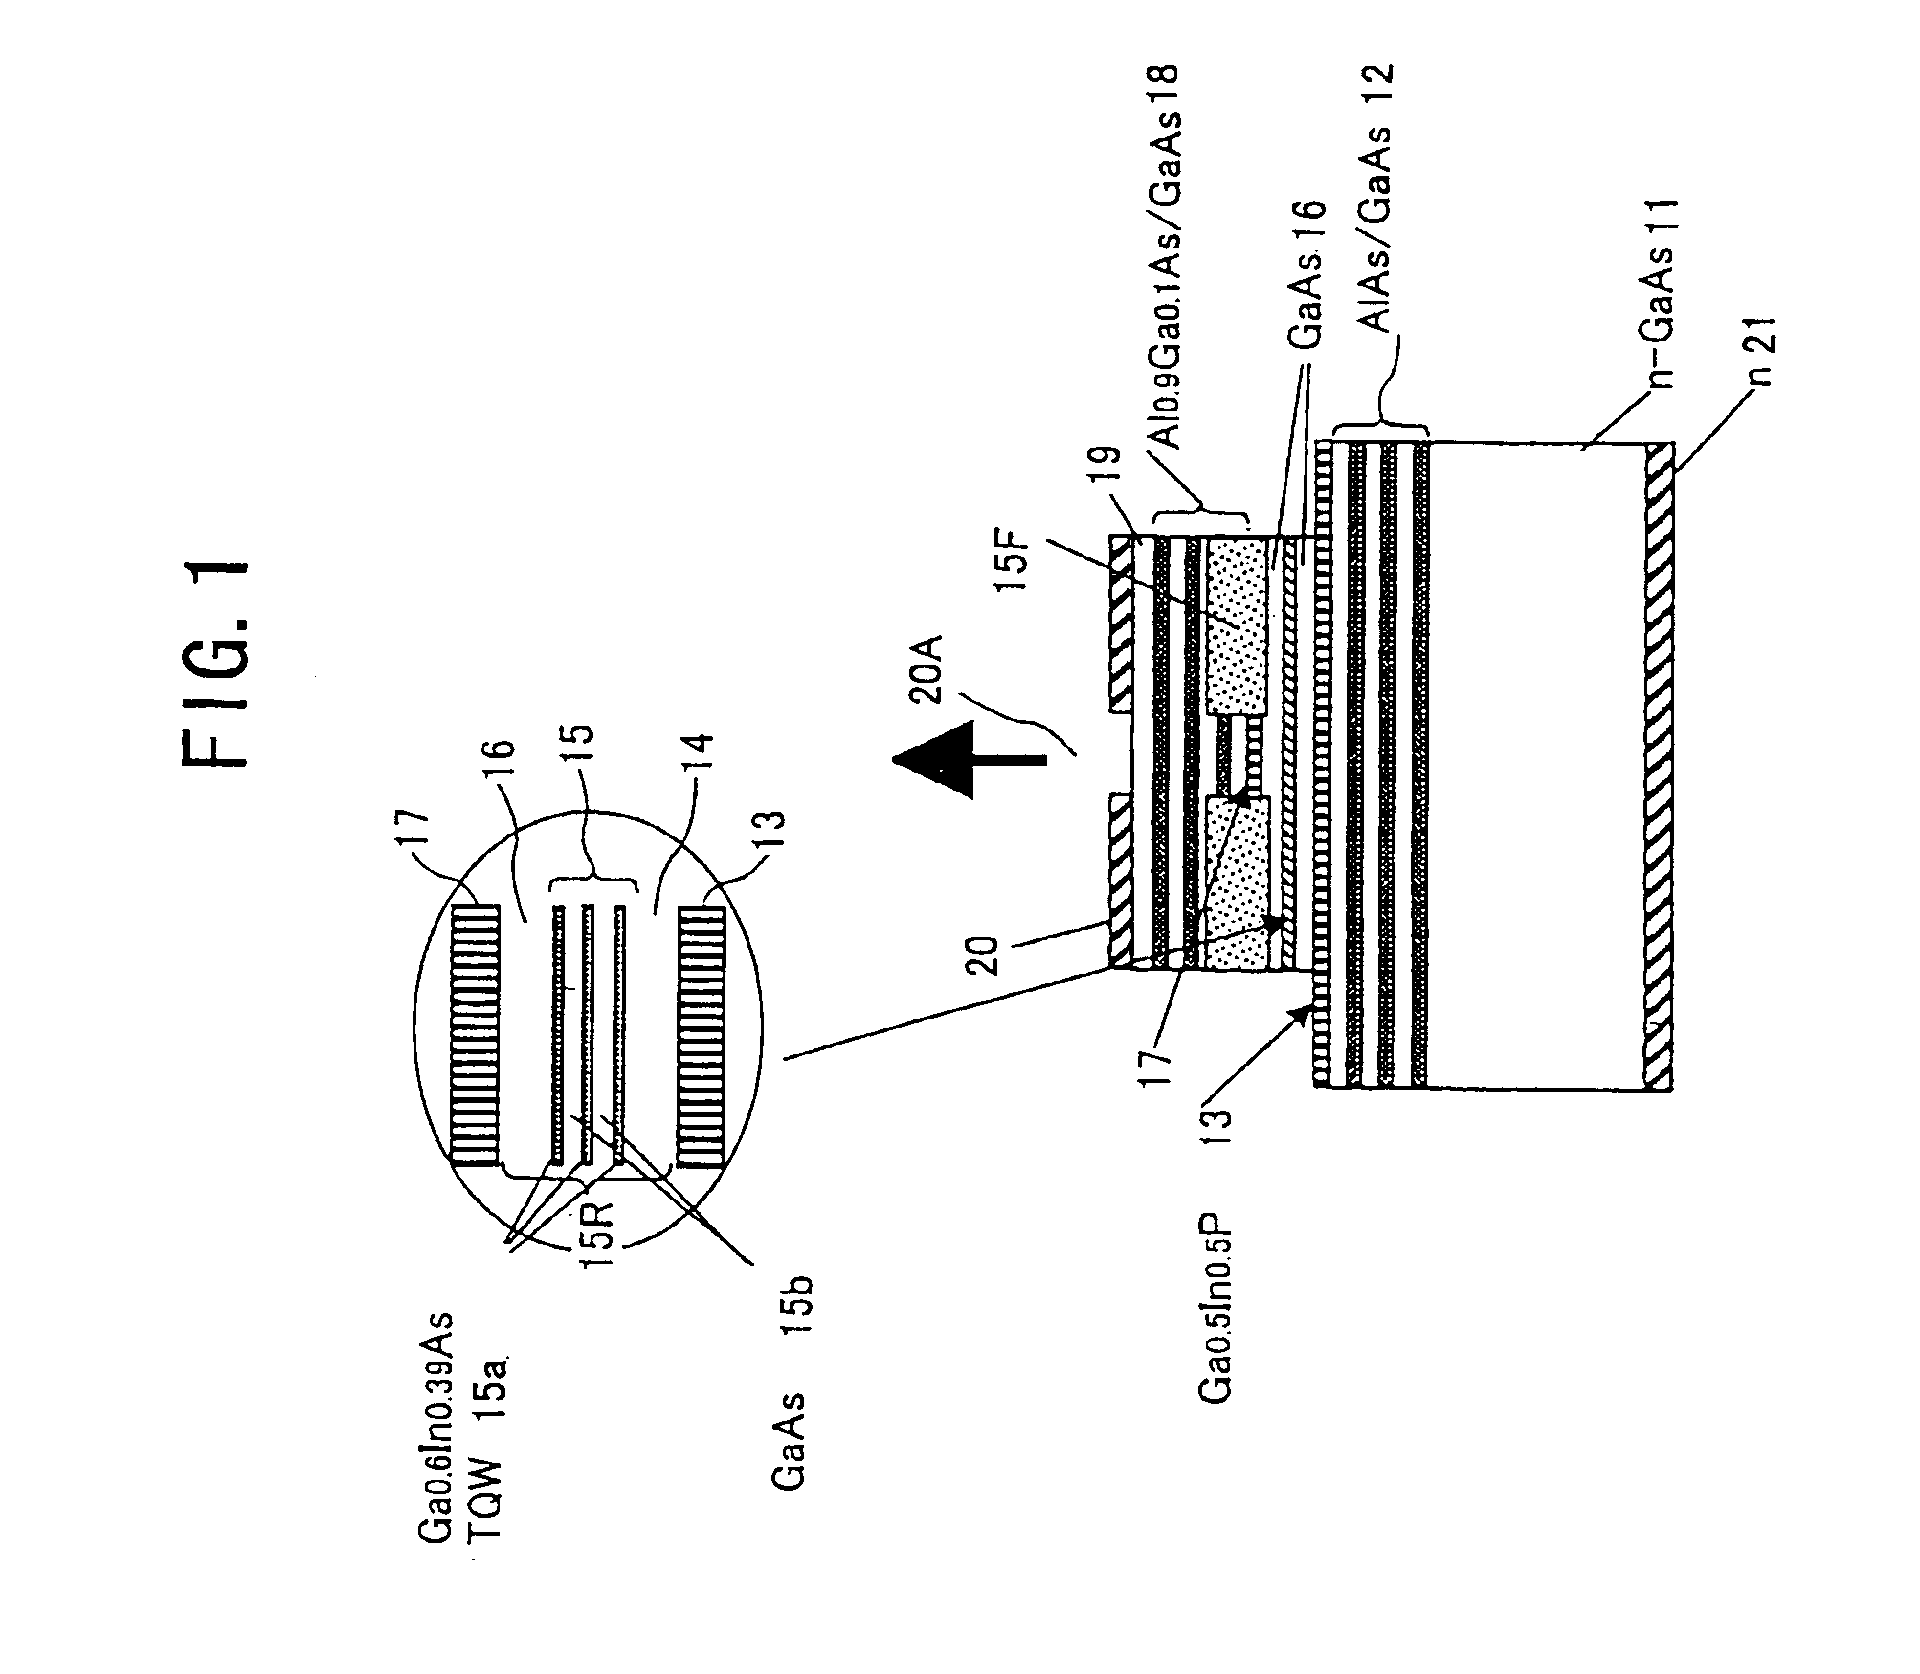 Surface-emission laser diode operable in the wavelength band of 1.1-7mum and optical telecommunication system using such a laser diode